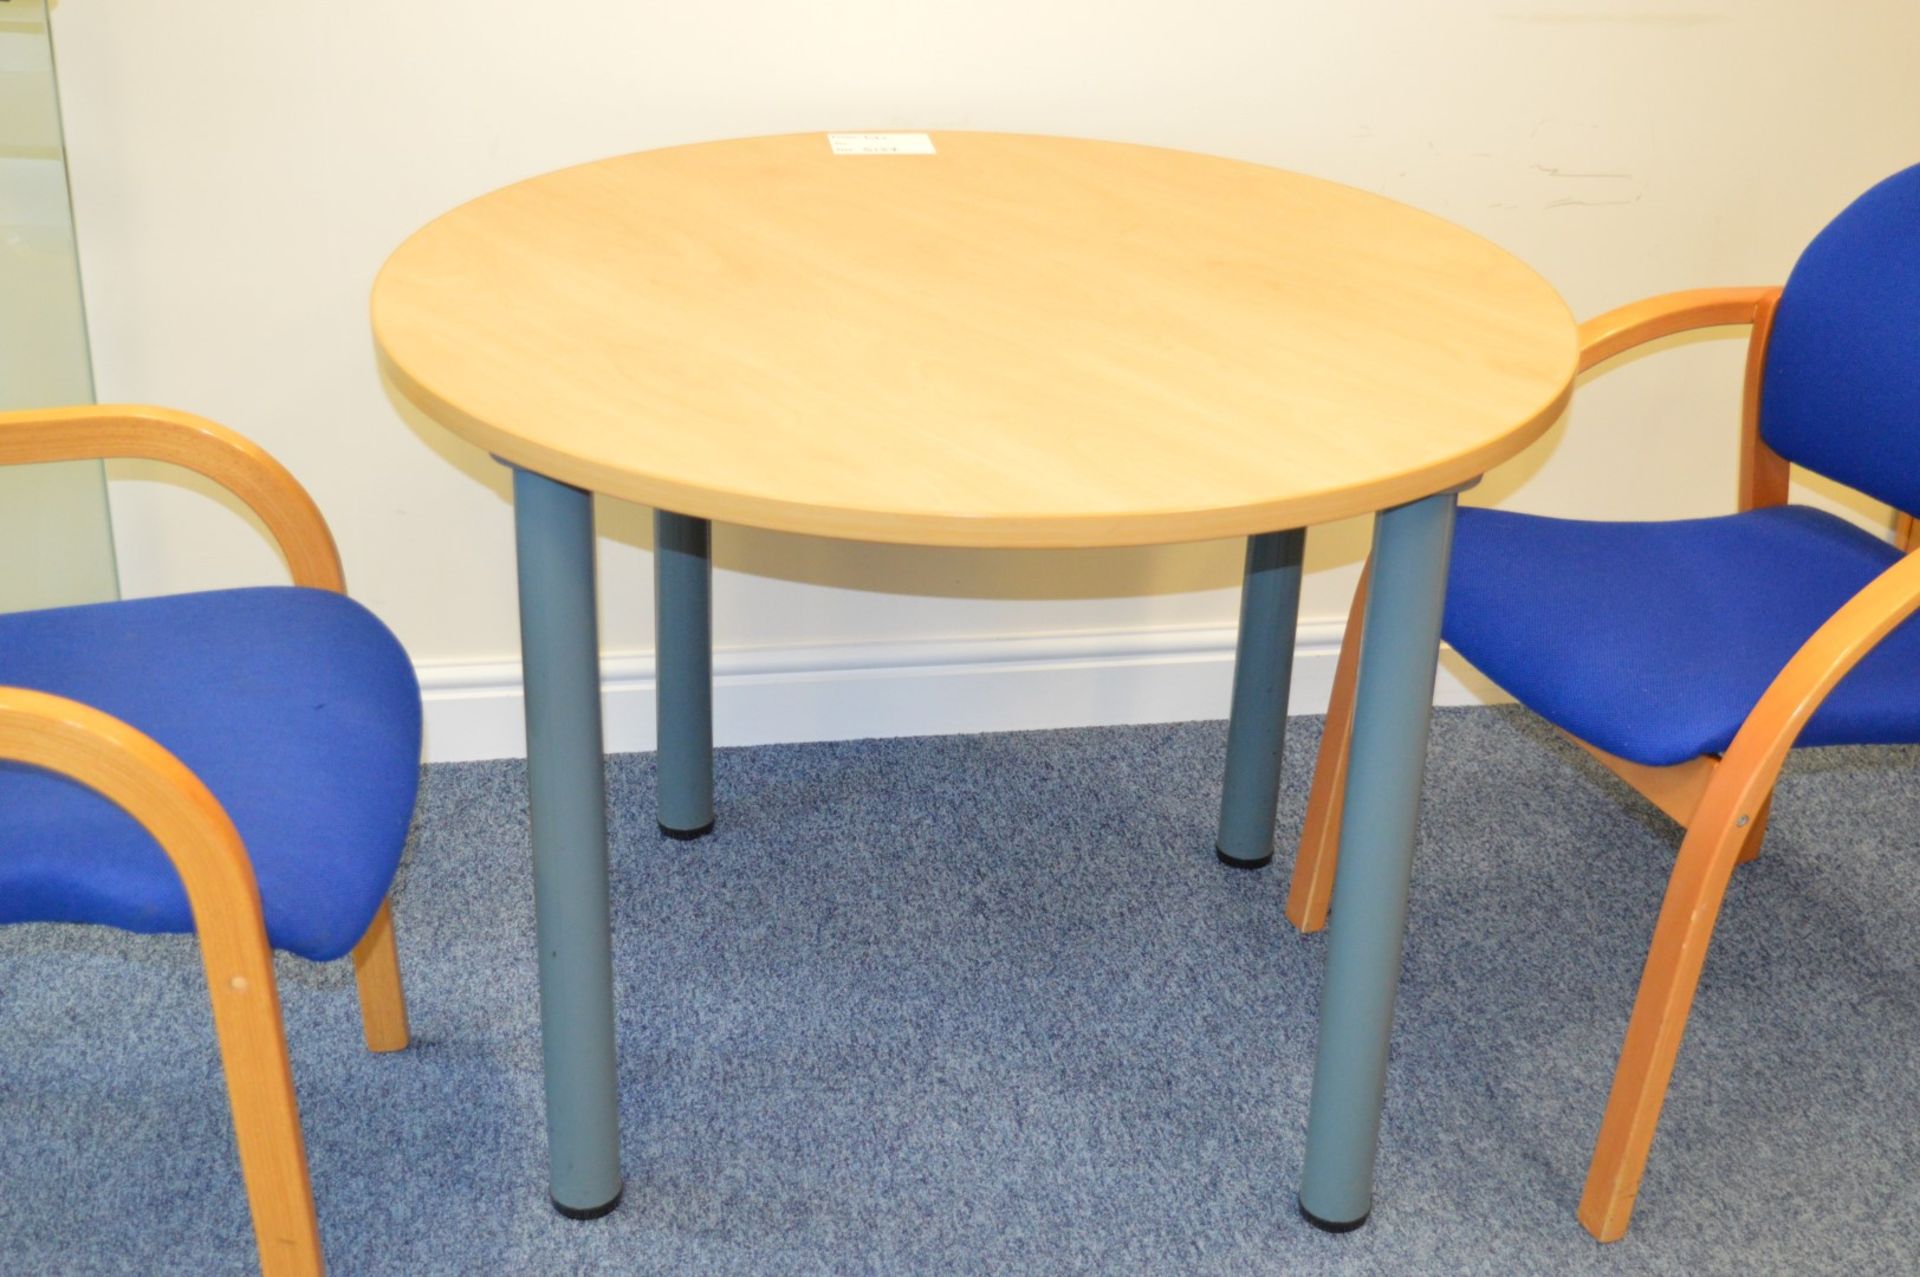 1 x Meeting Taable With Beech Finish and Two Curved Wood Meeting Chairs - H73 x W100 x D100 cms - - Image 3 of 4